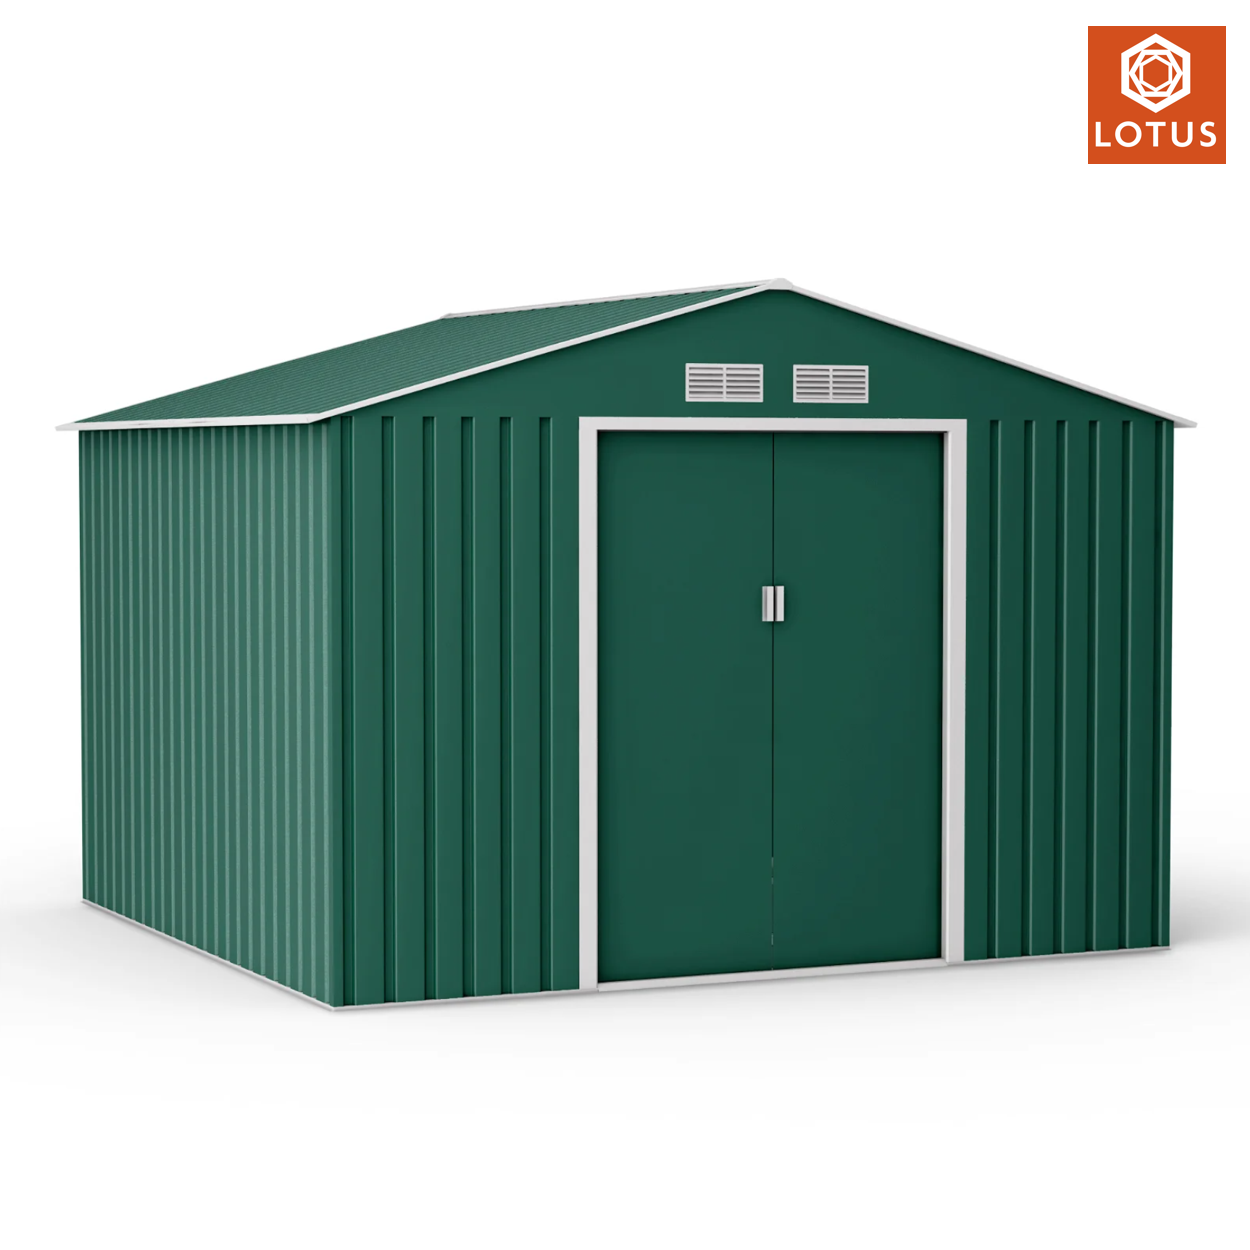 Featured image for “LOTUS | Orion Apex Metal Shed™”